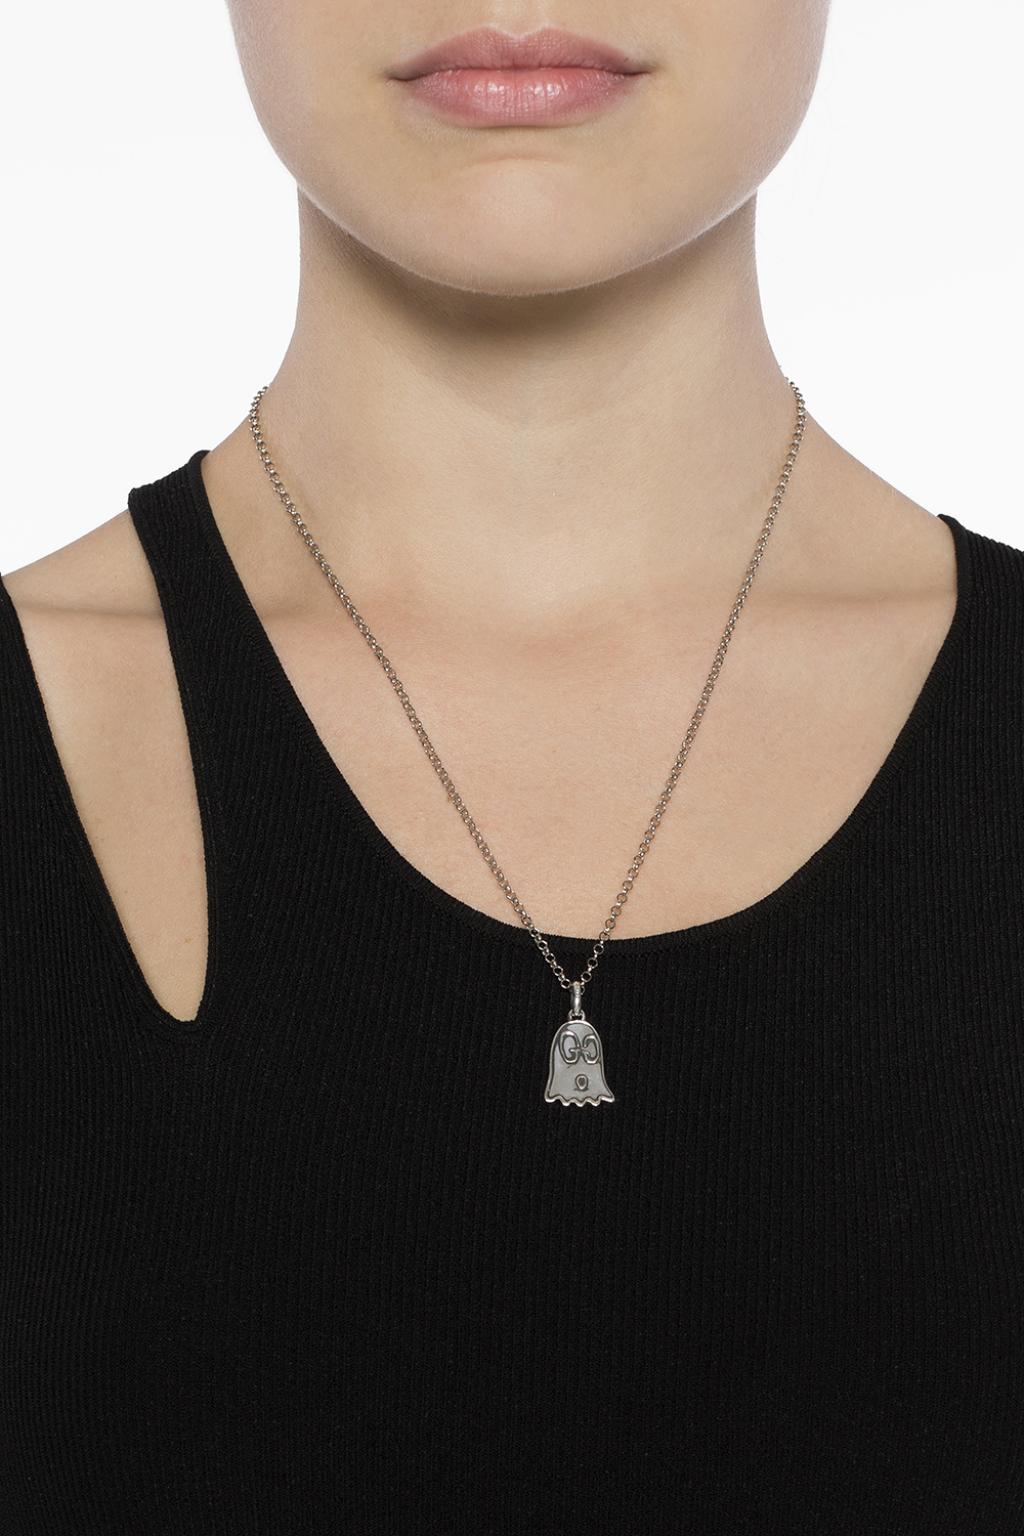 Gucci Necklace With Ghost Charm in 